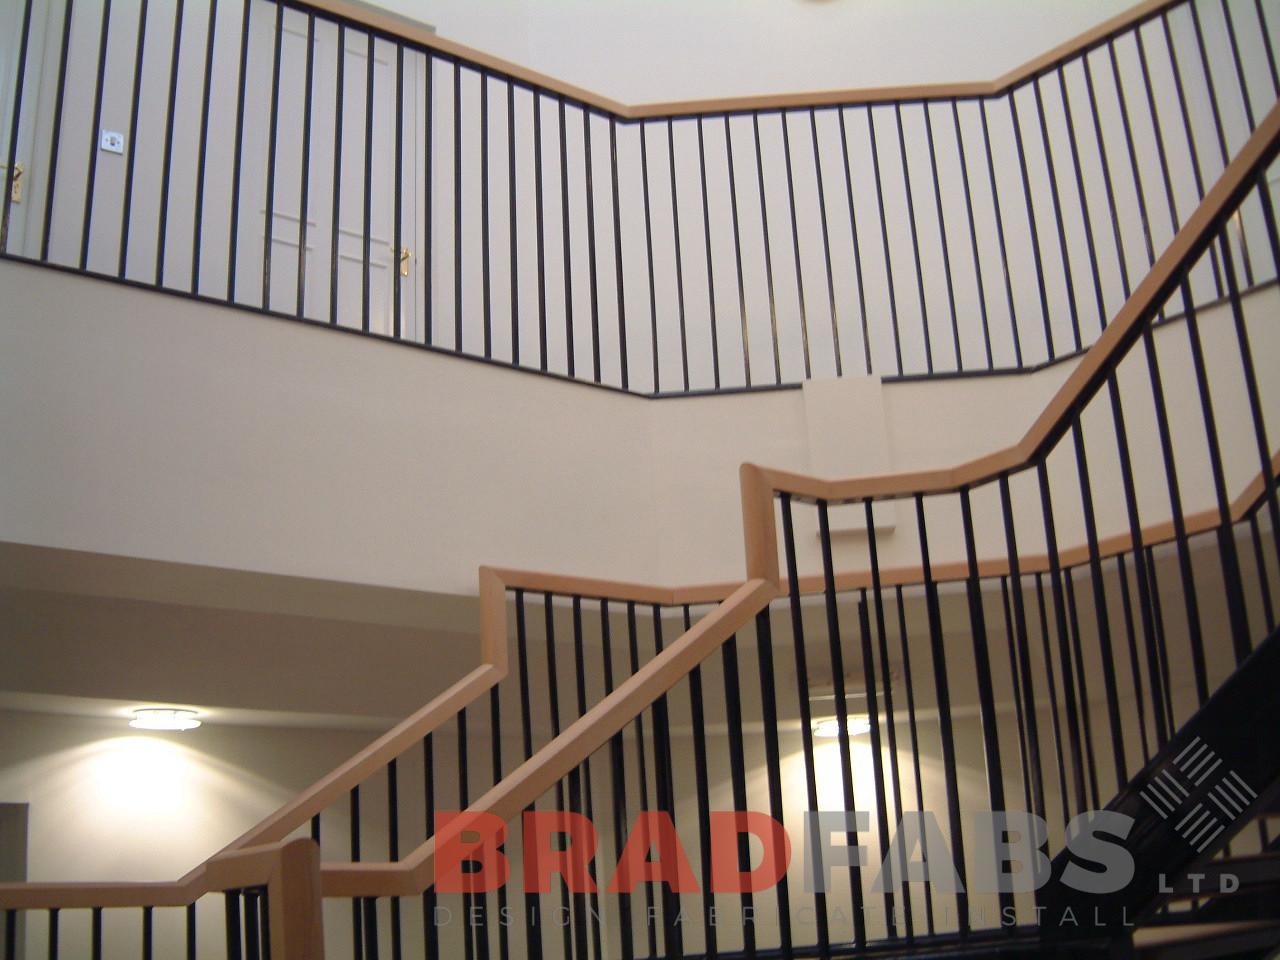 Vertical bar balustrade on bespoke helix staircase by Bradfabs